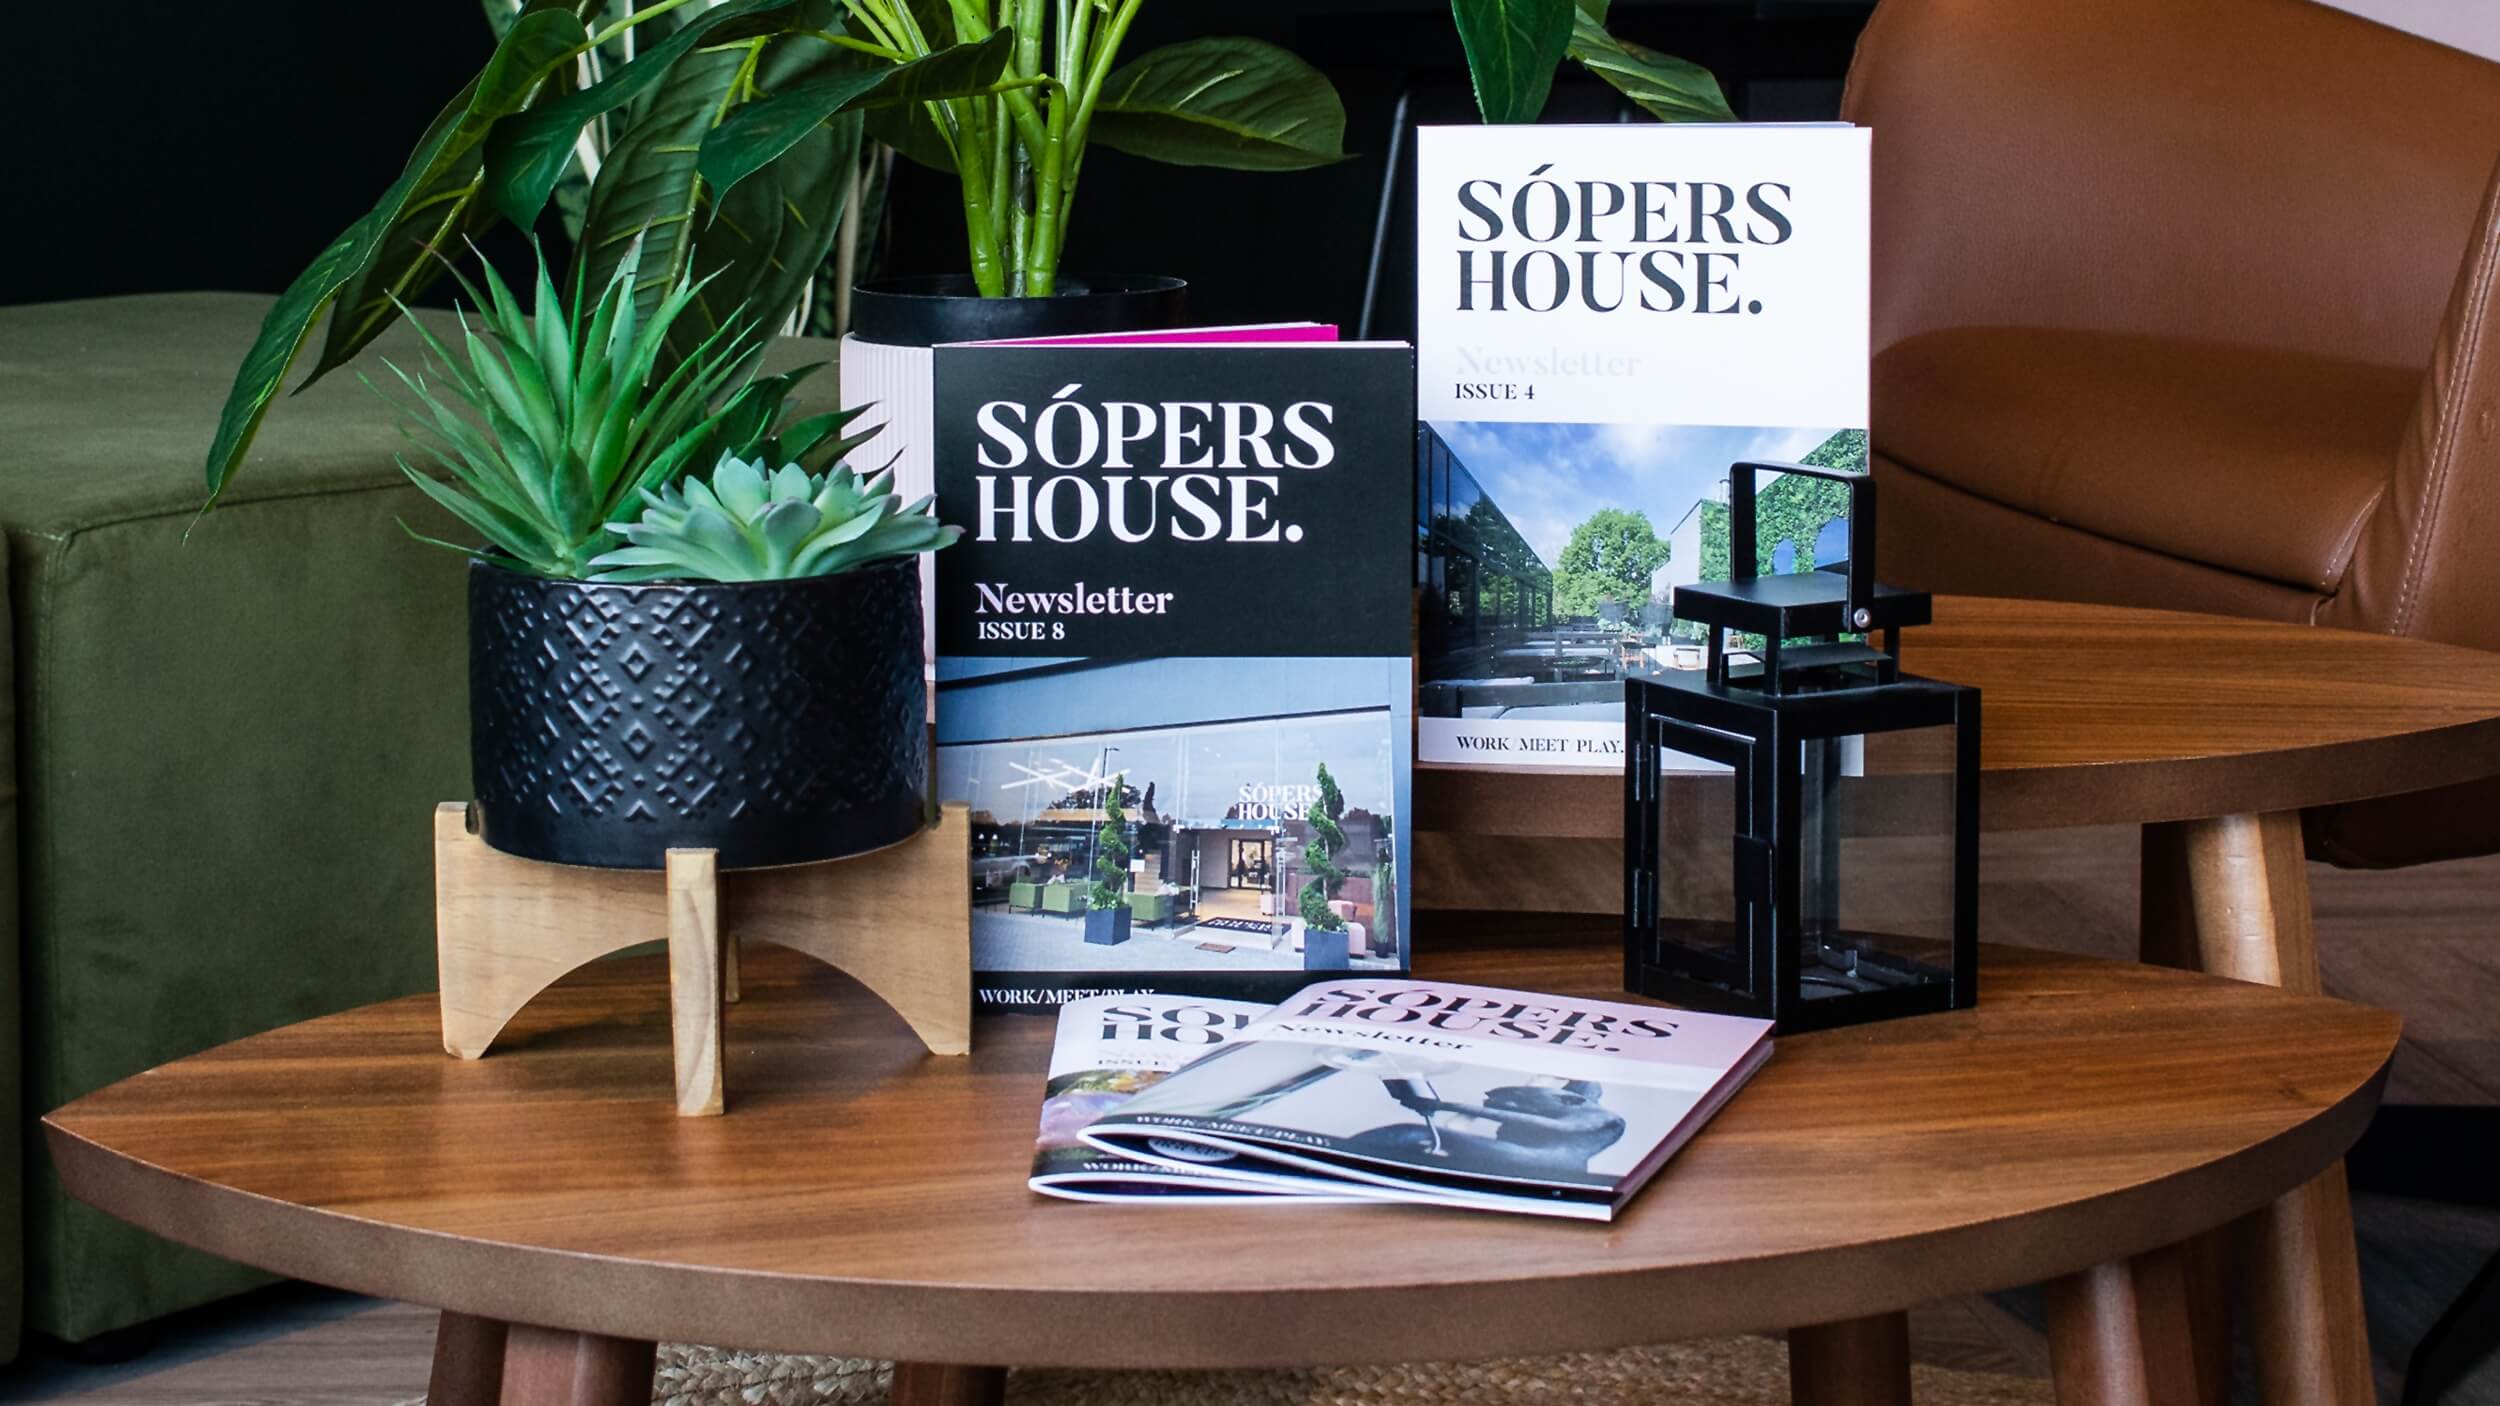 Sopers House newsletters displayed on a table